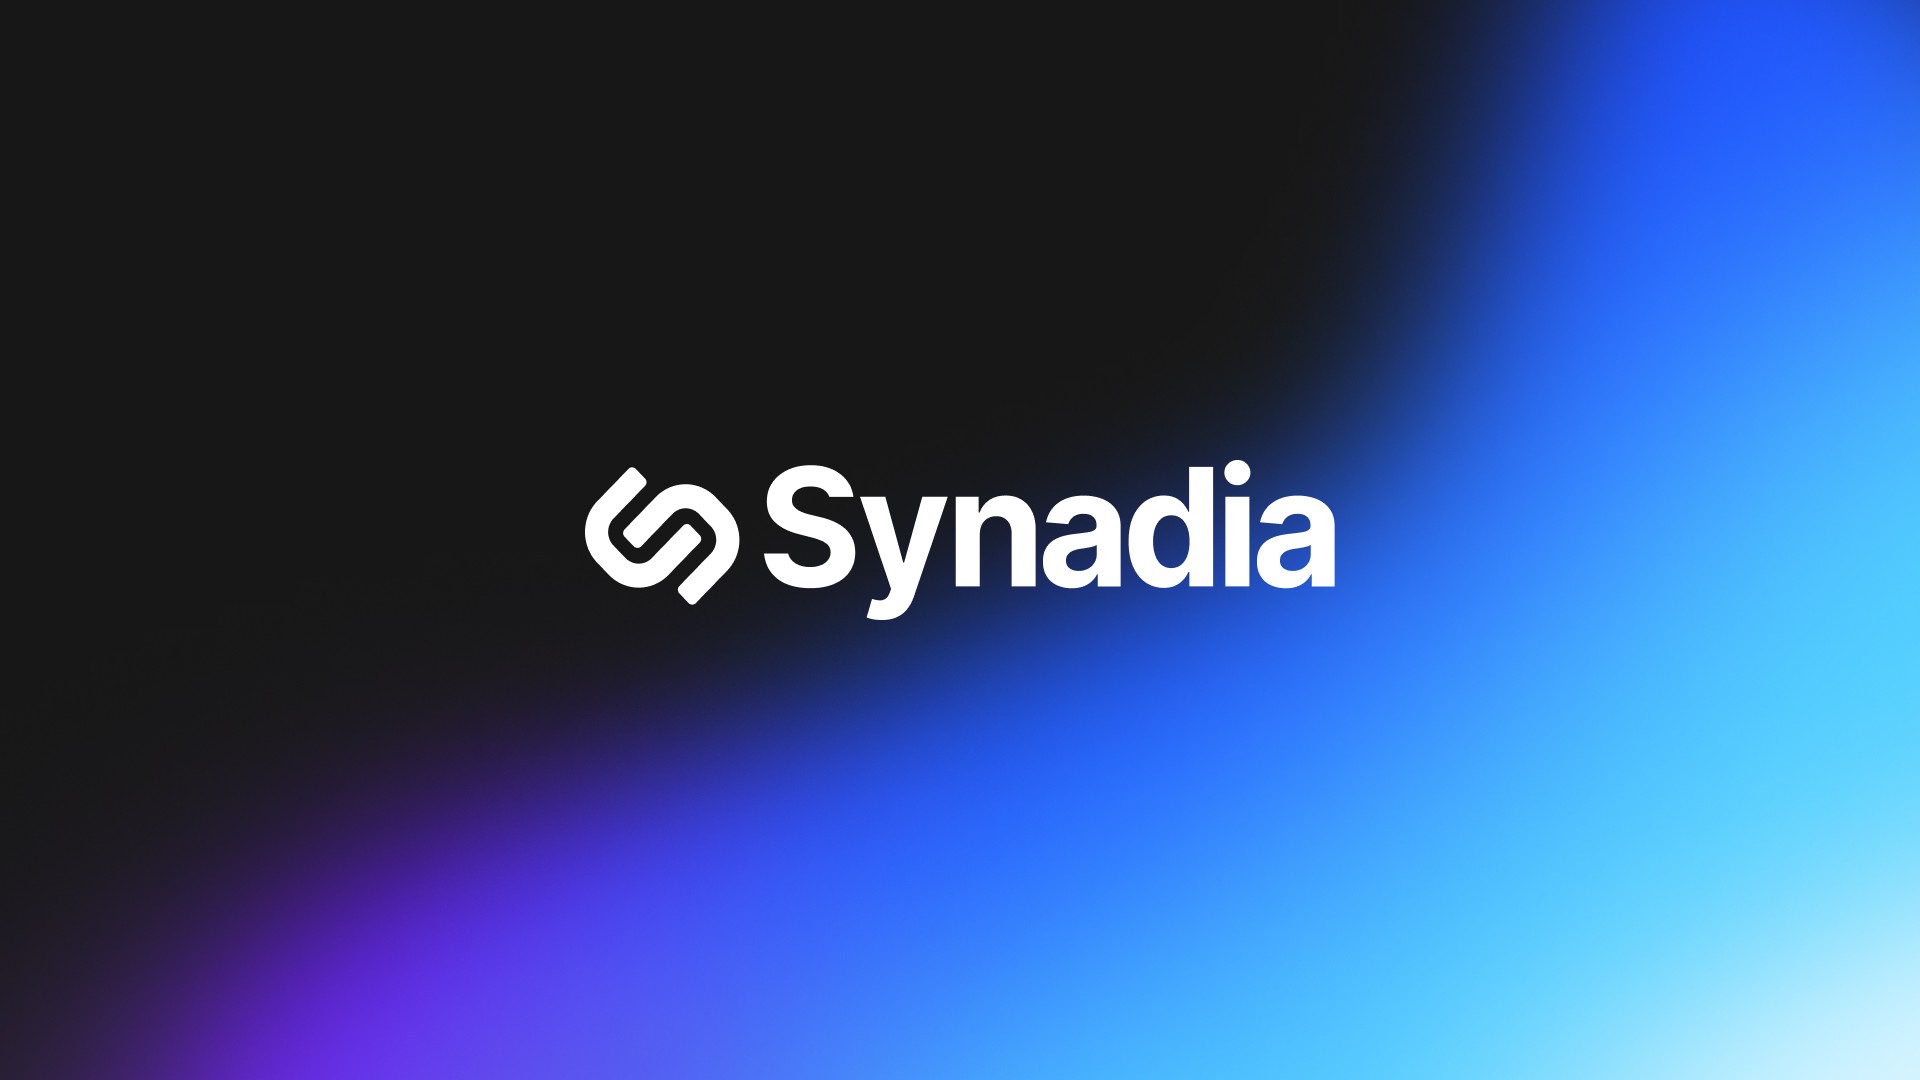 Synadia news and updates